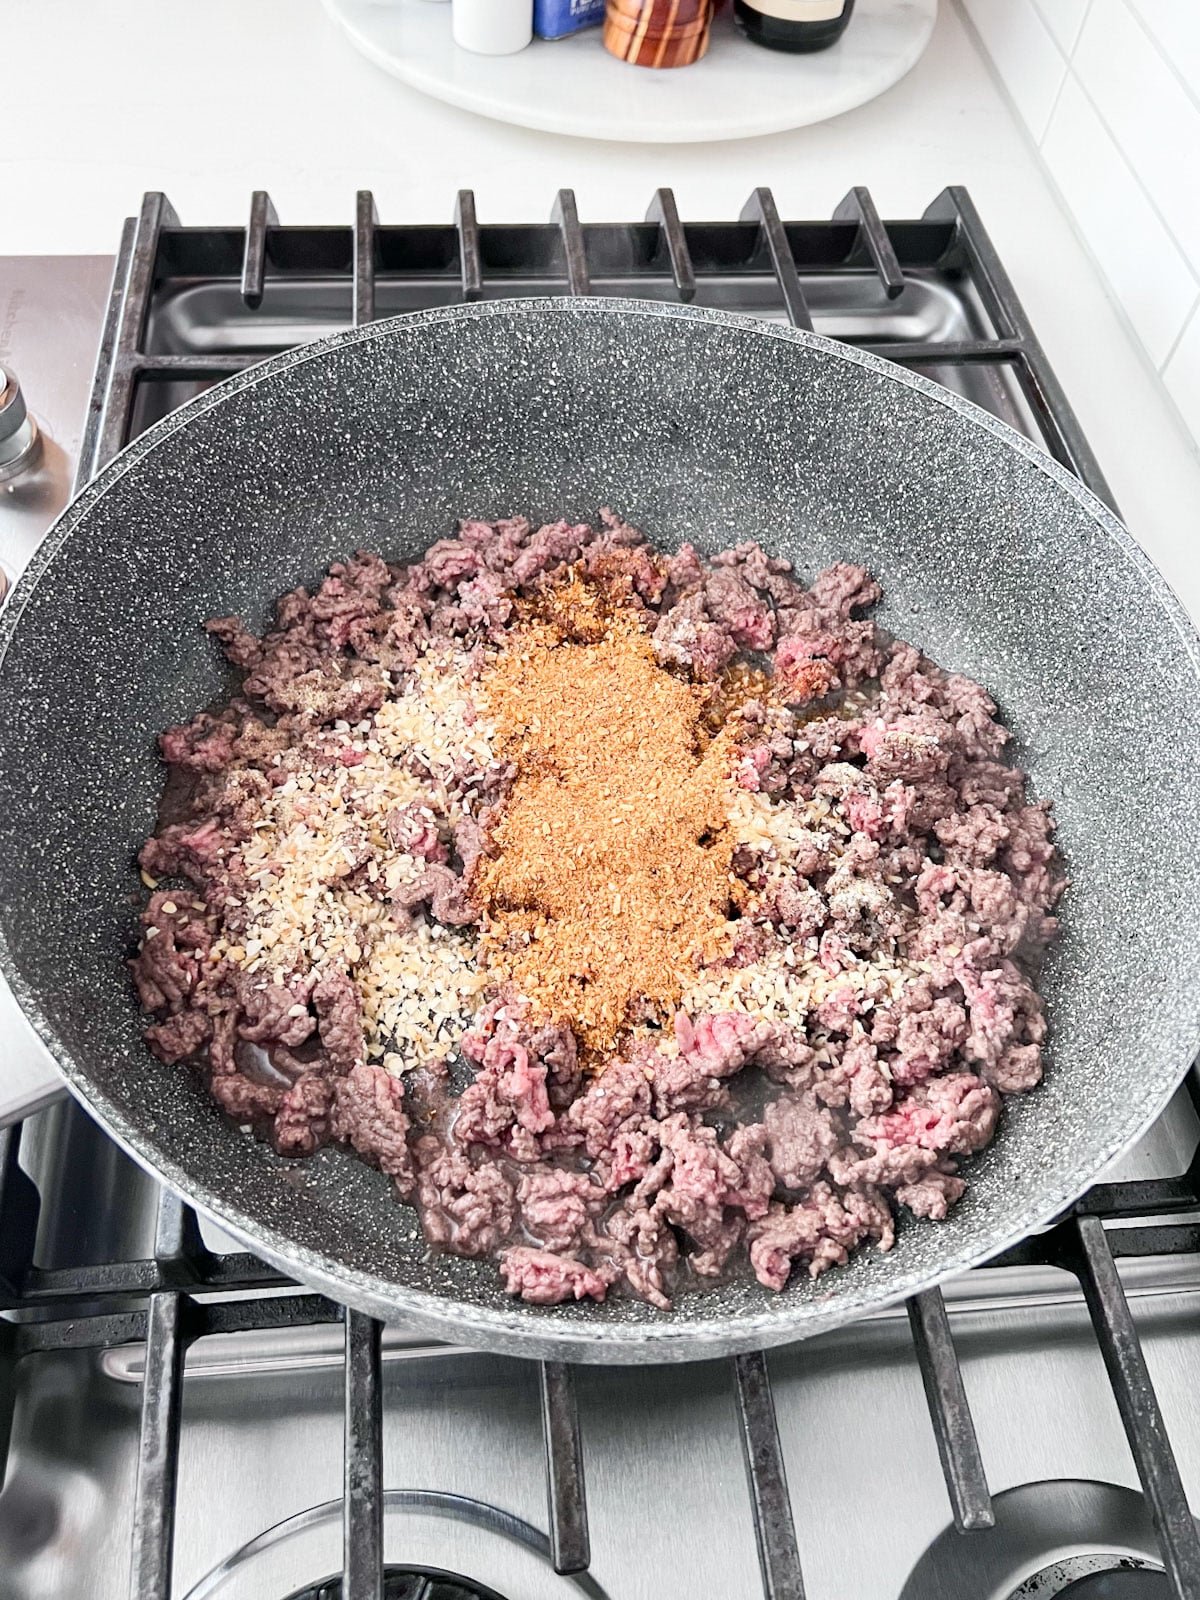 Browning ground beef and seasoning in a skillet on a stove.